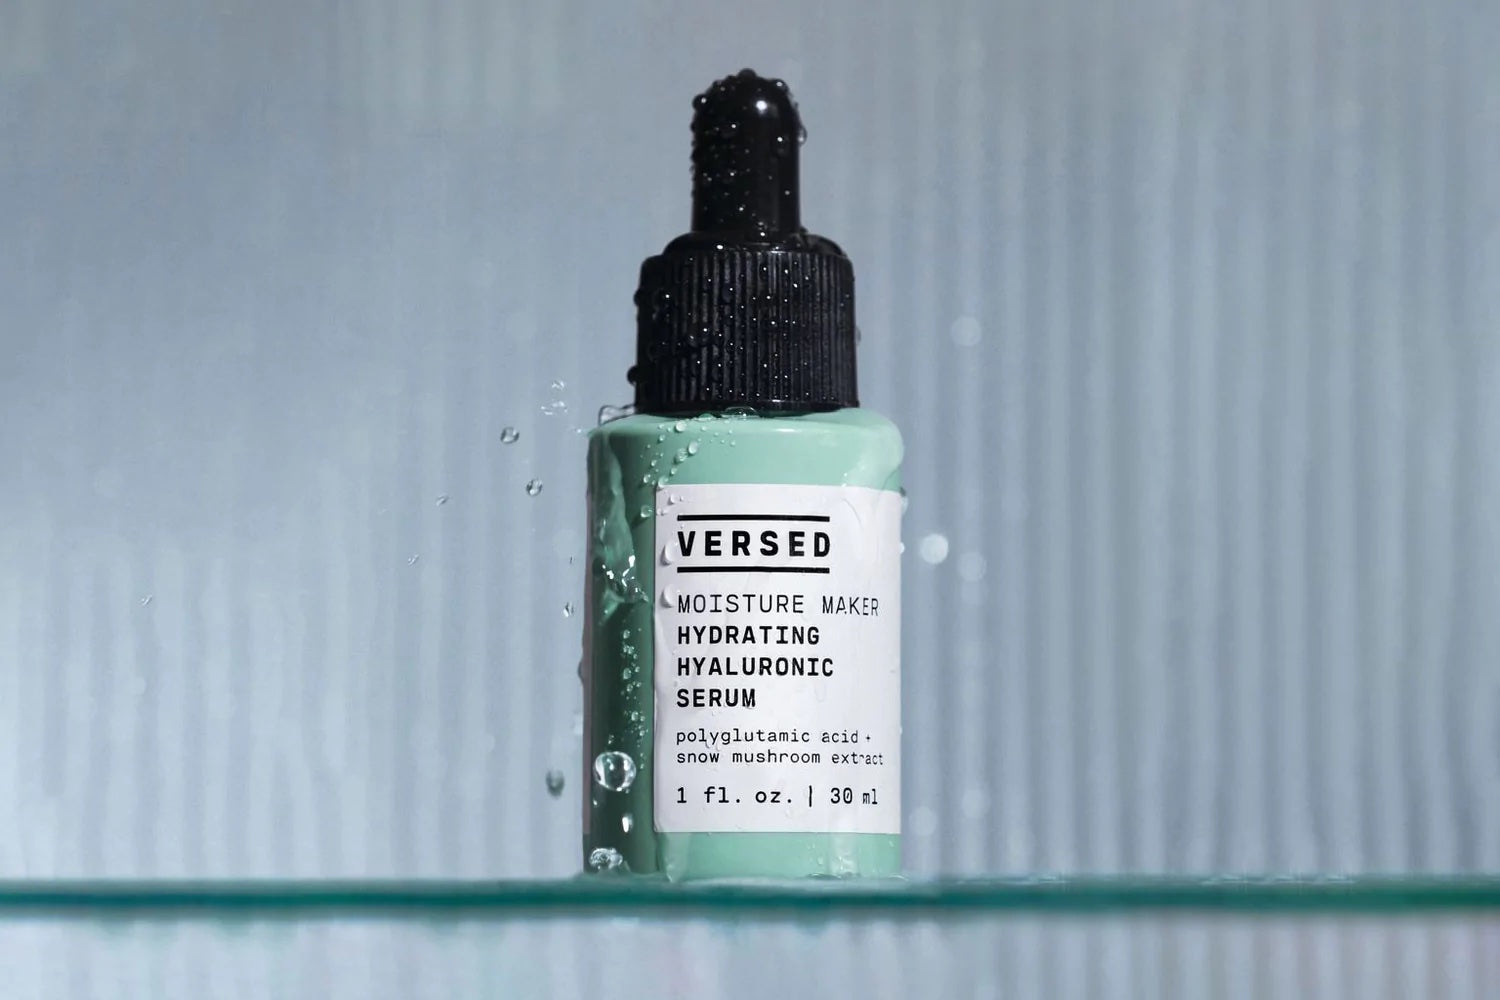 A bottle of skin serum by Versed skincare, covered in condensation